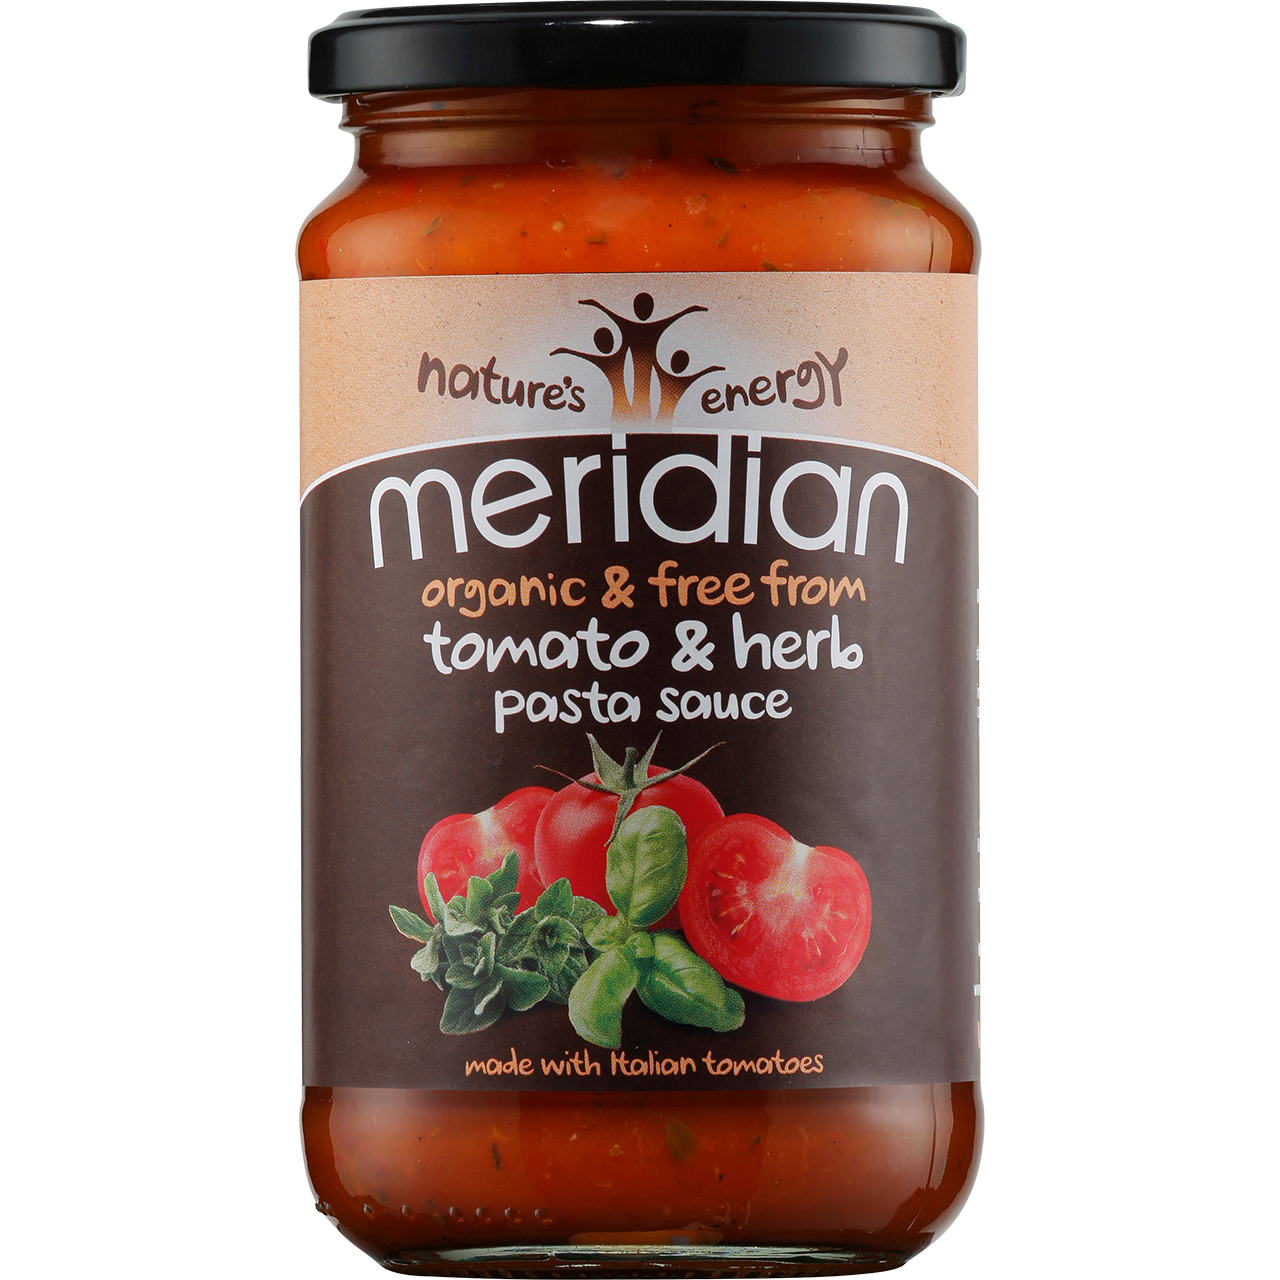 Meridian Organic Tomato and Herb Pasta Sauce 440g - Just Natural